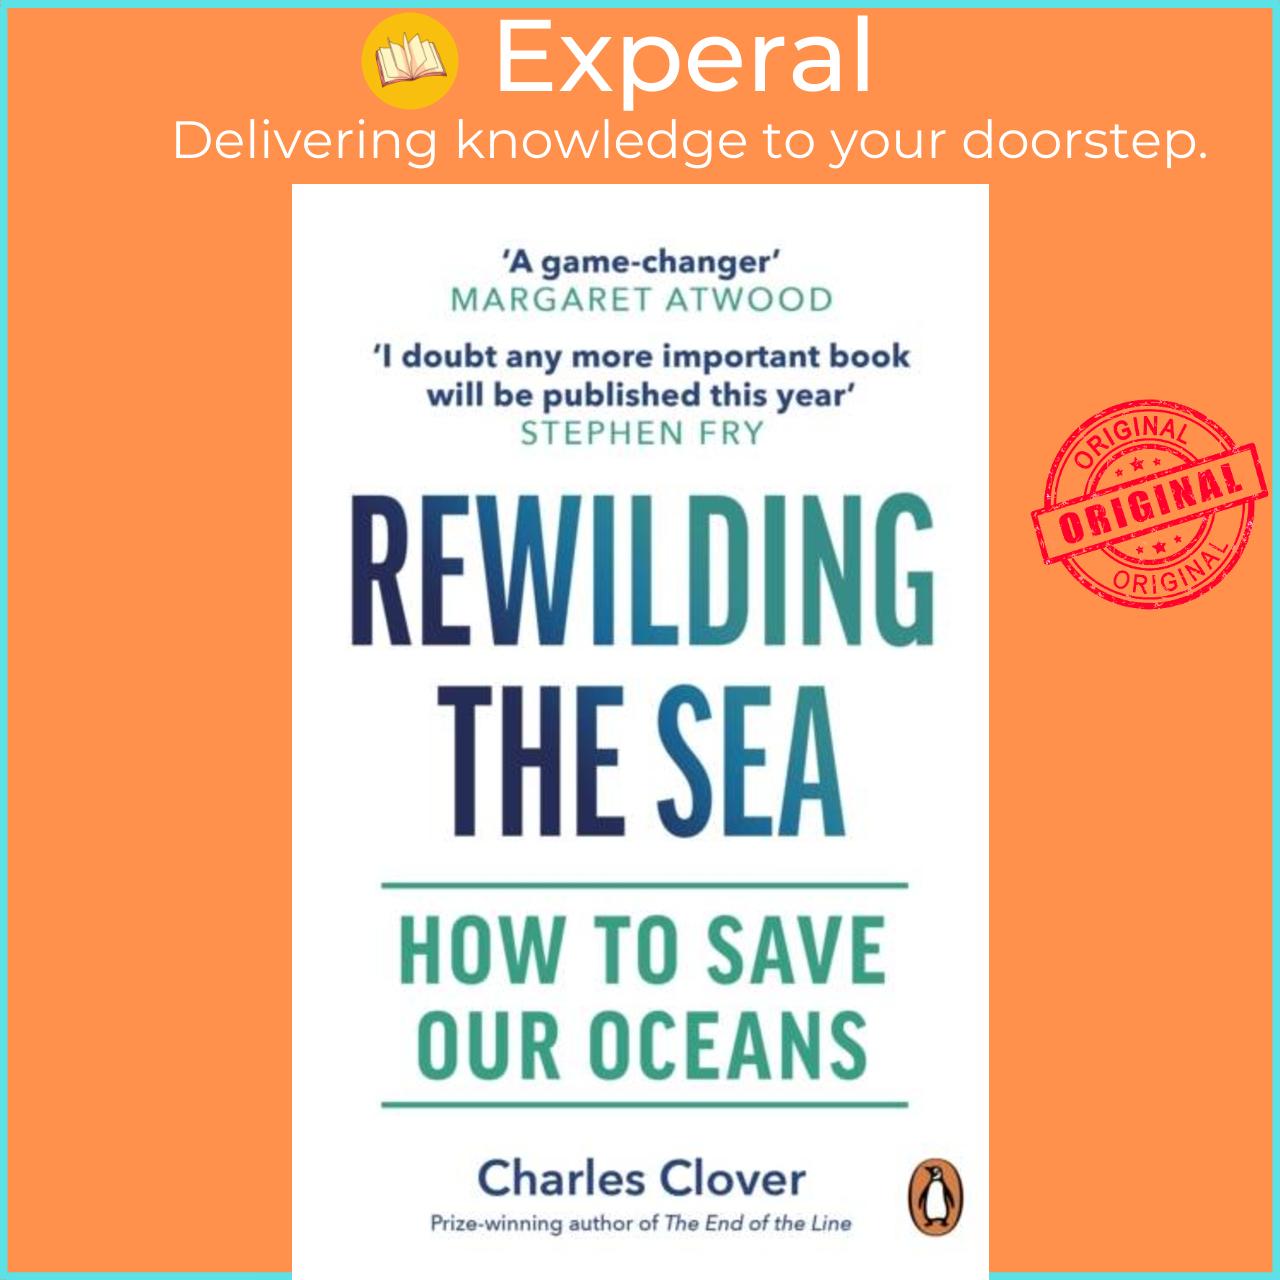 Sách - Rewilding the Sea - How to Save our Oceans by Charles Clover (UK edition, paperback)